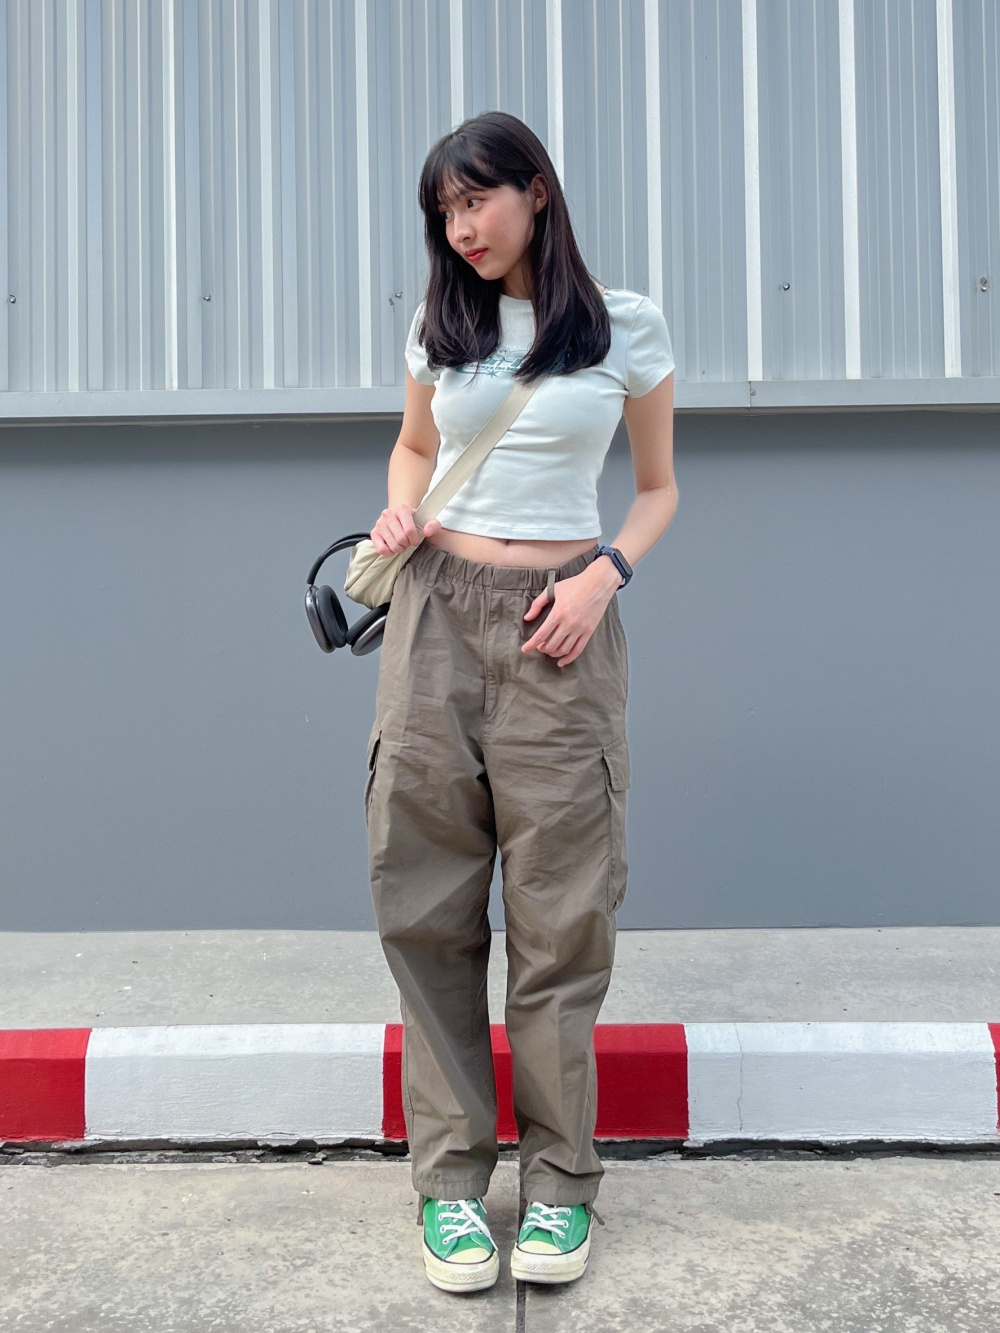 Check styling ideas for「Jersey Relaxed Jacket、Parachute Pants